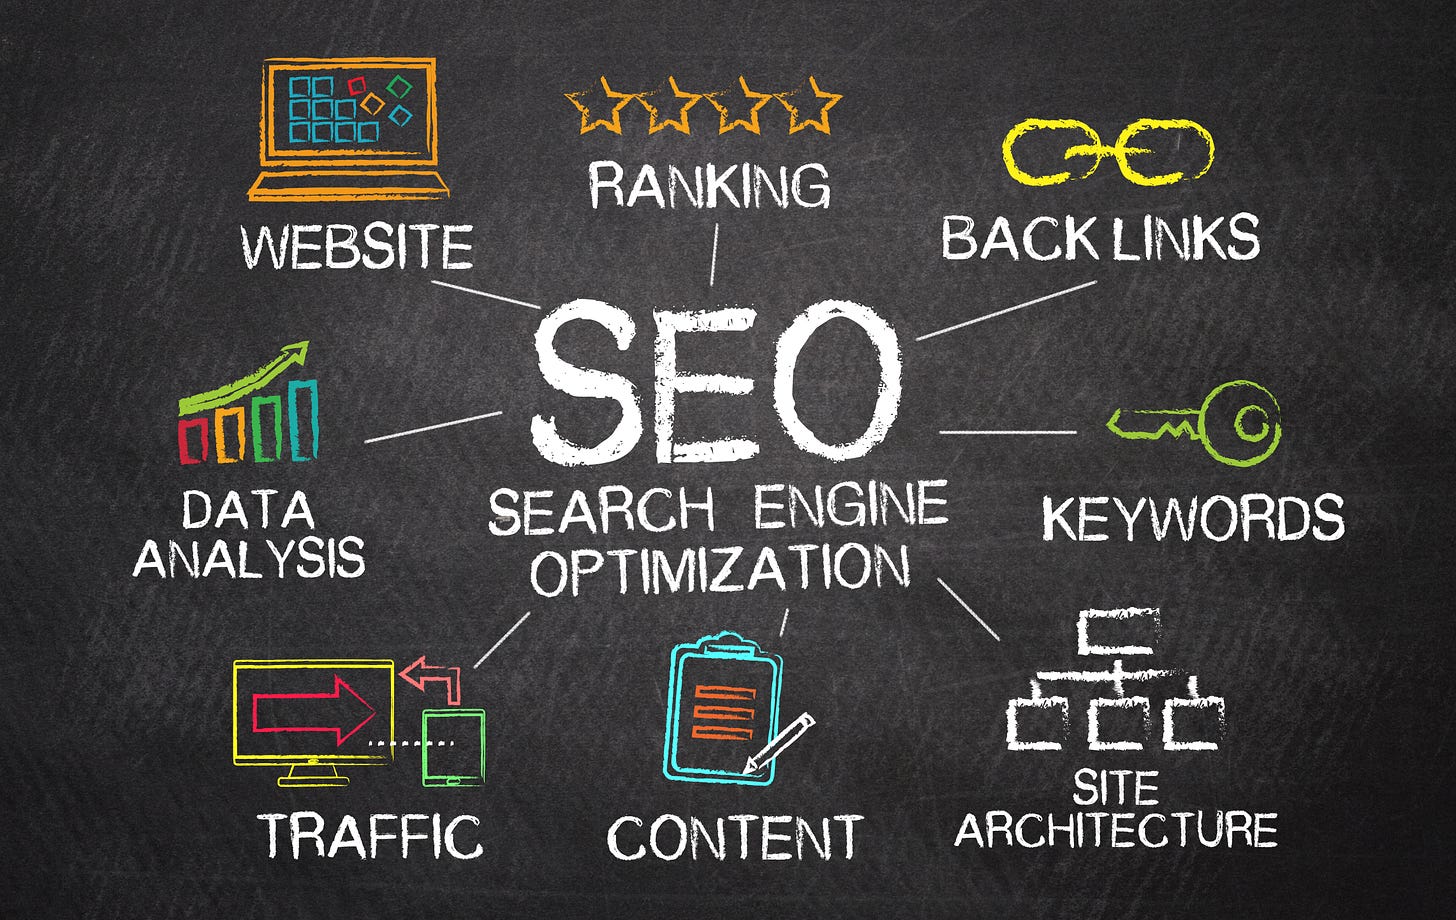 6 Powerful SEO Tips to Change the Search Game - Business 2 Community